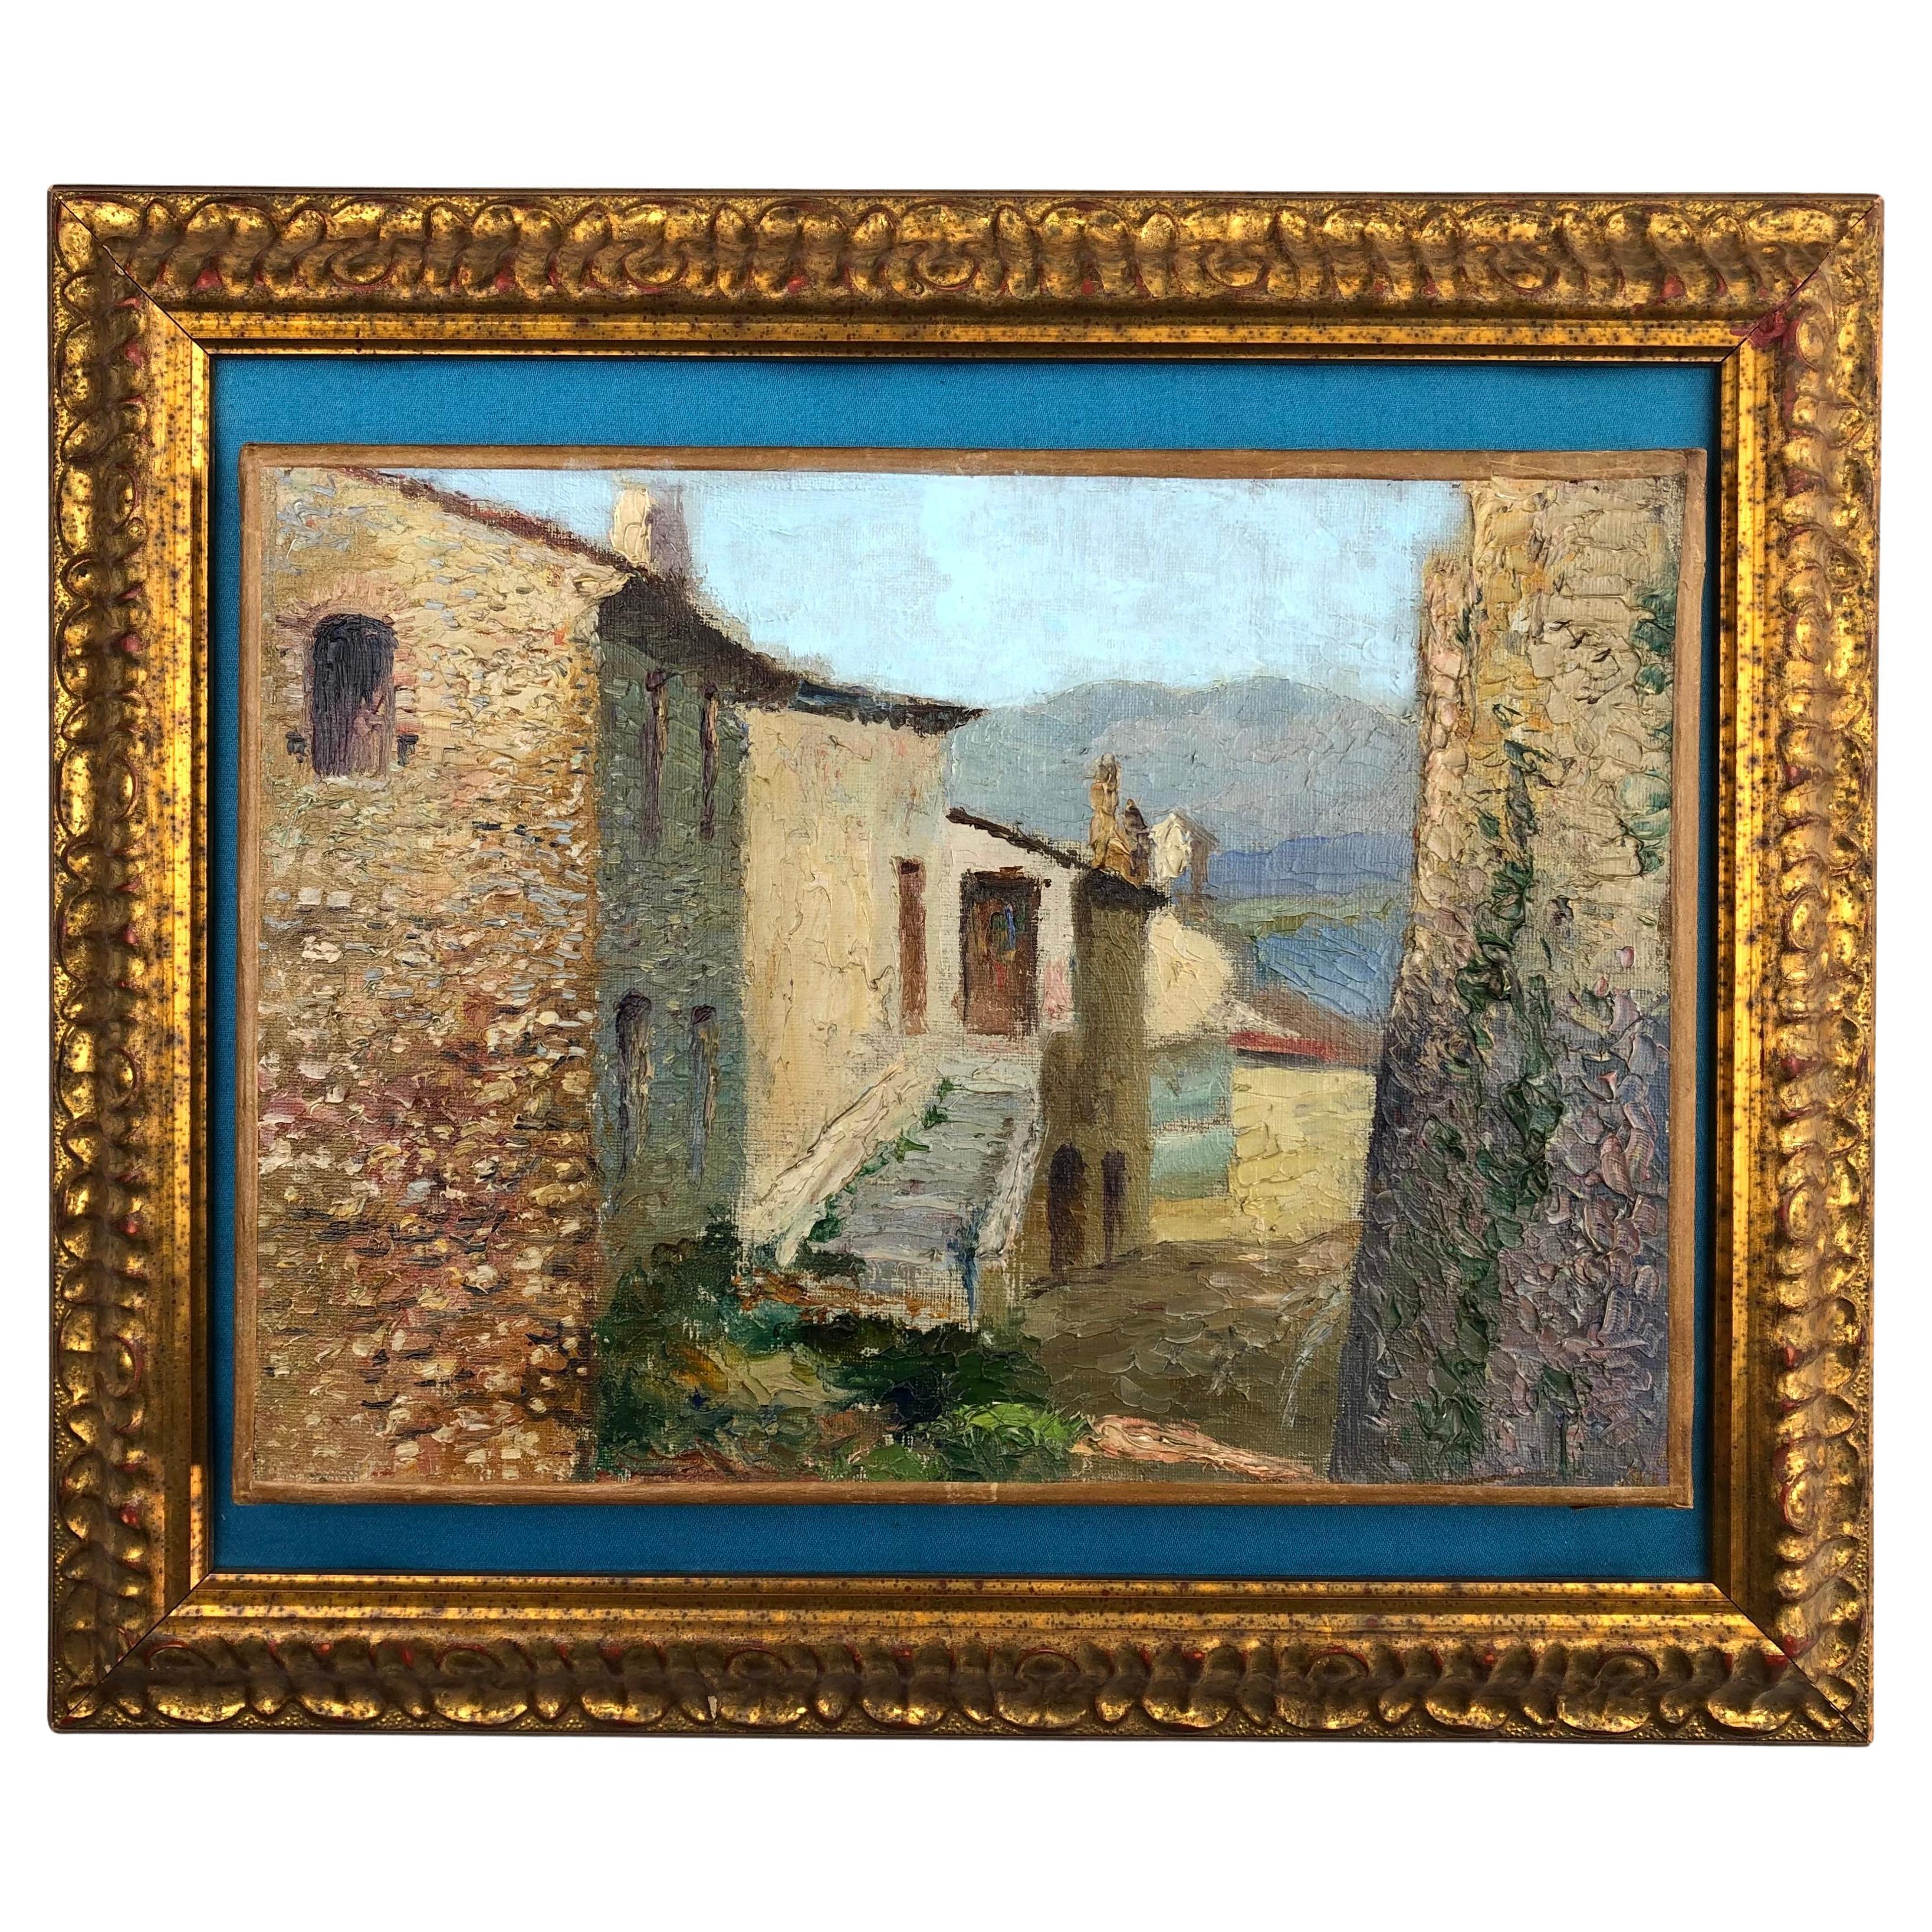 Original Oil Painting of the French Cote d'Azur Village Cagnes For Sale